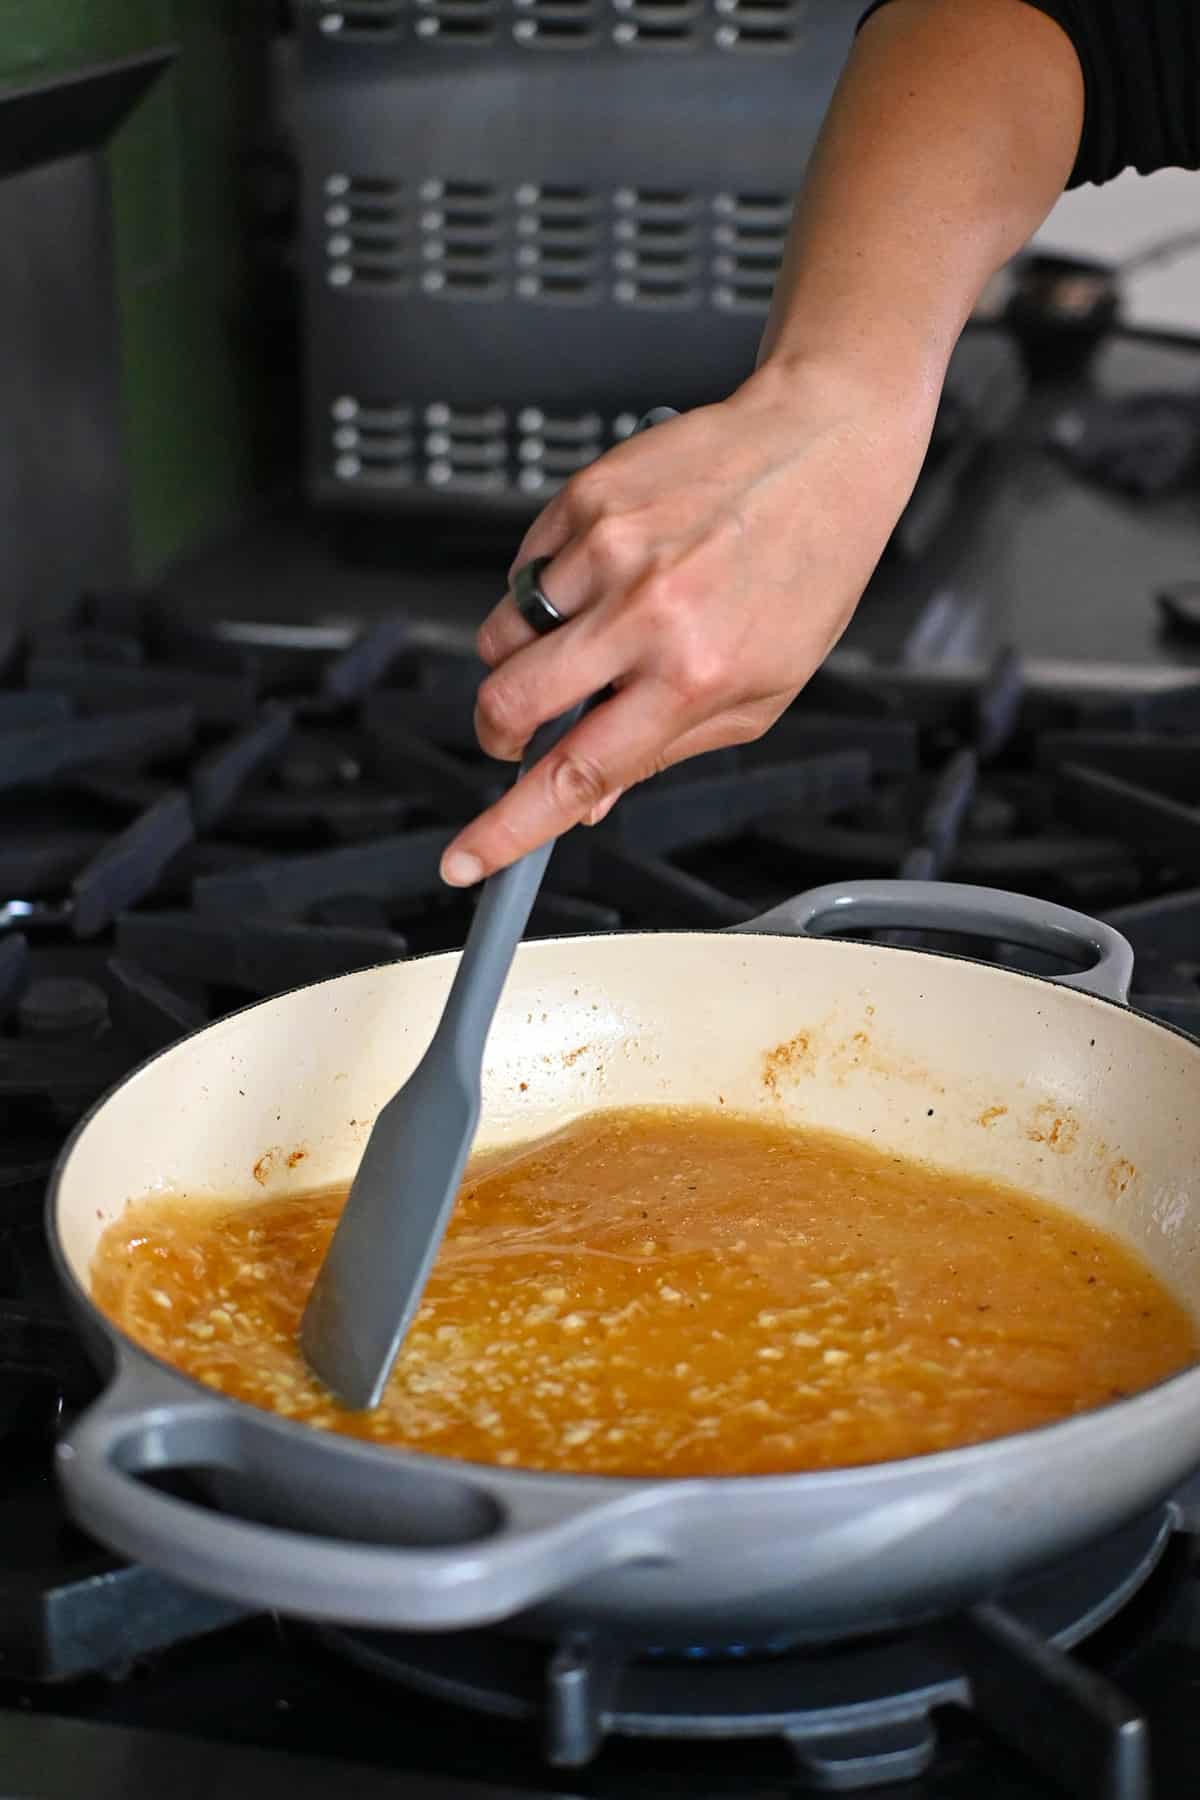 A gray silicone spatula is scraping up the fond in a pan to make lemon garlic chicken sauce.